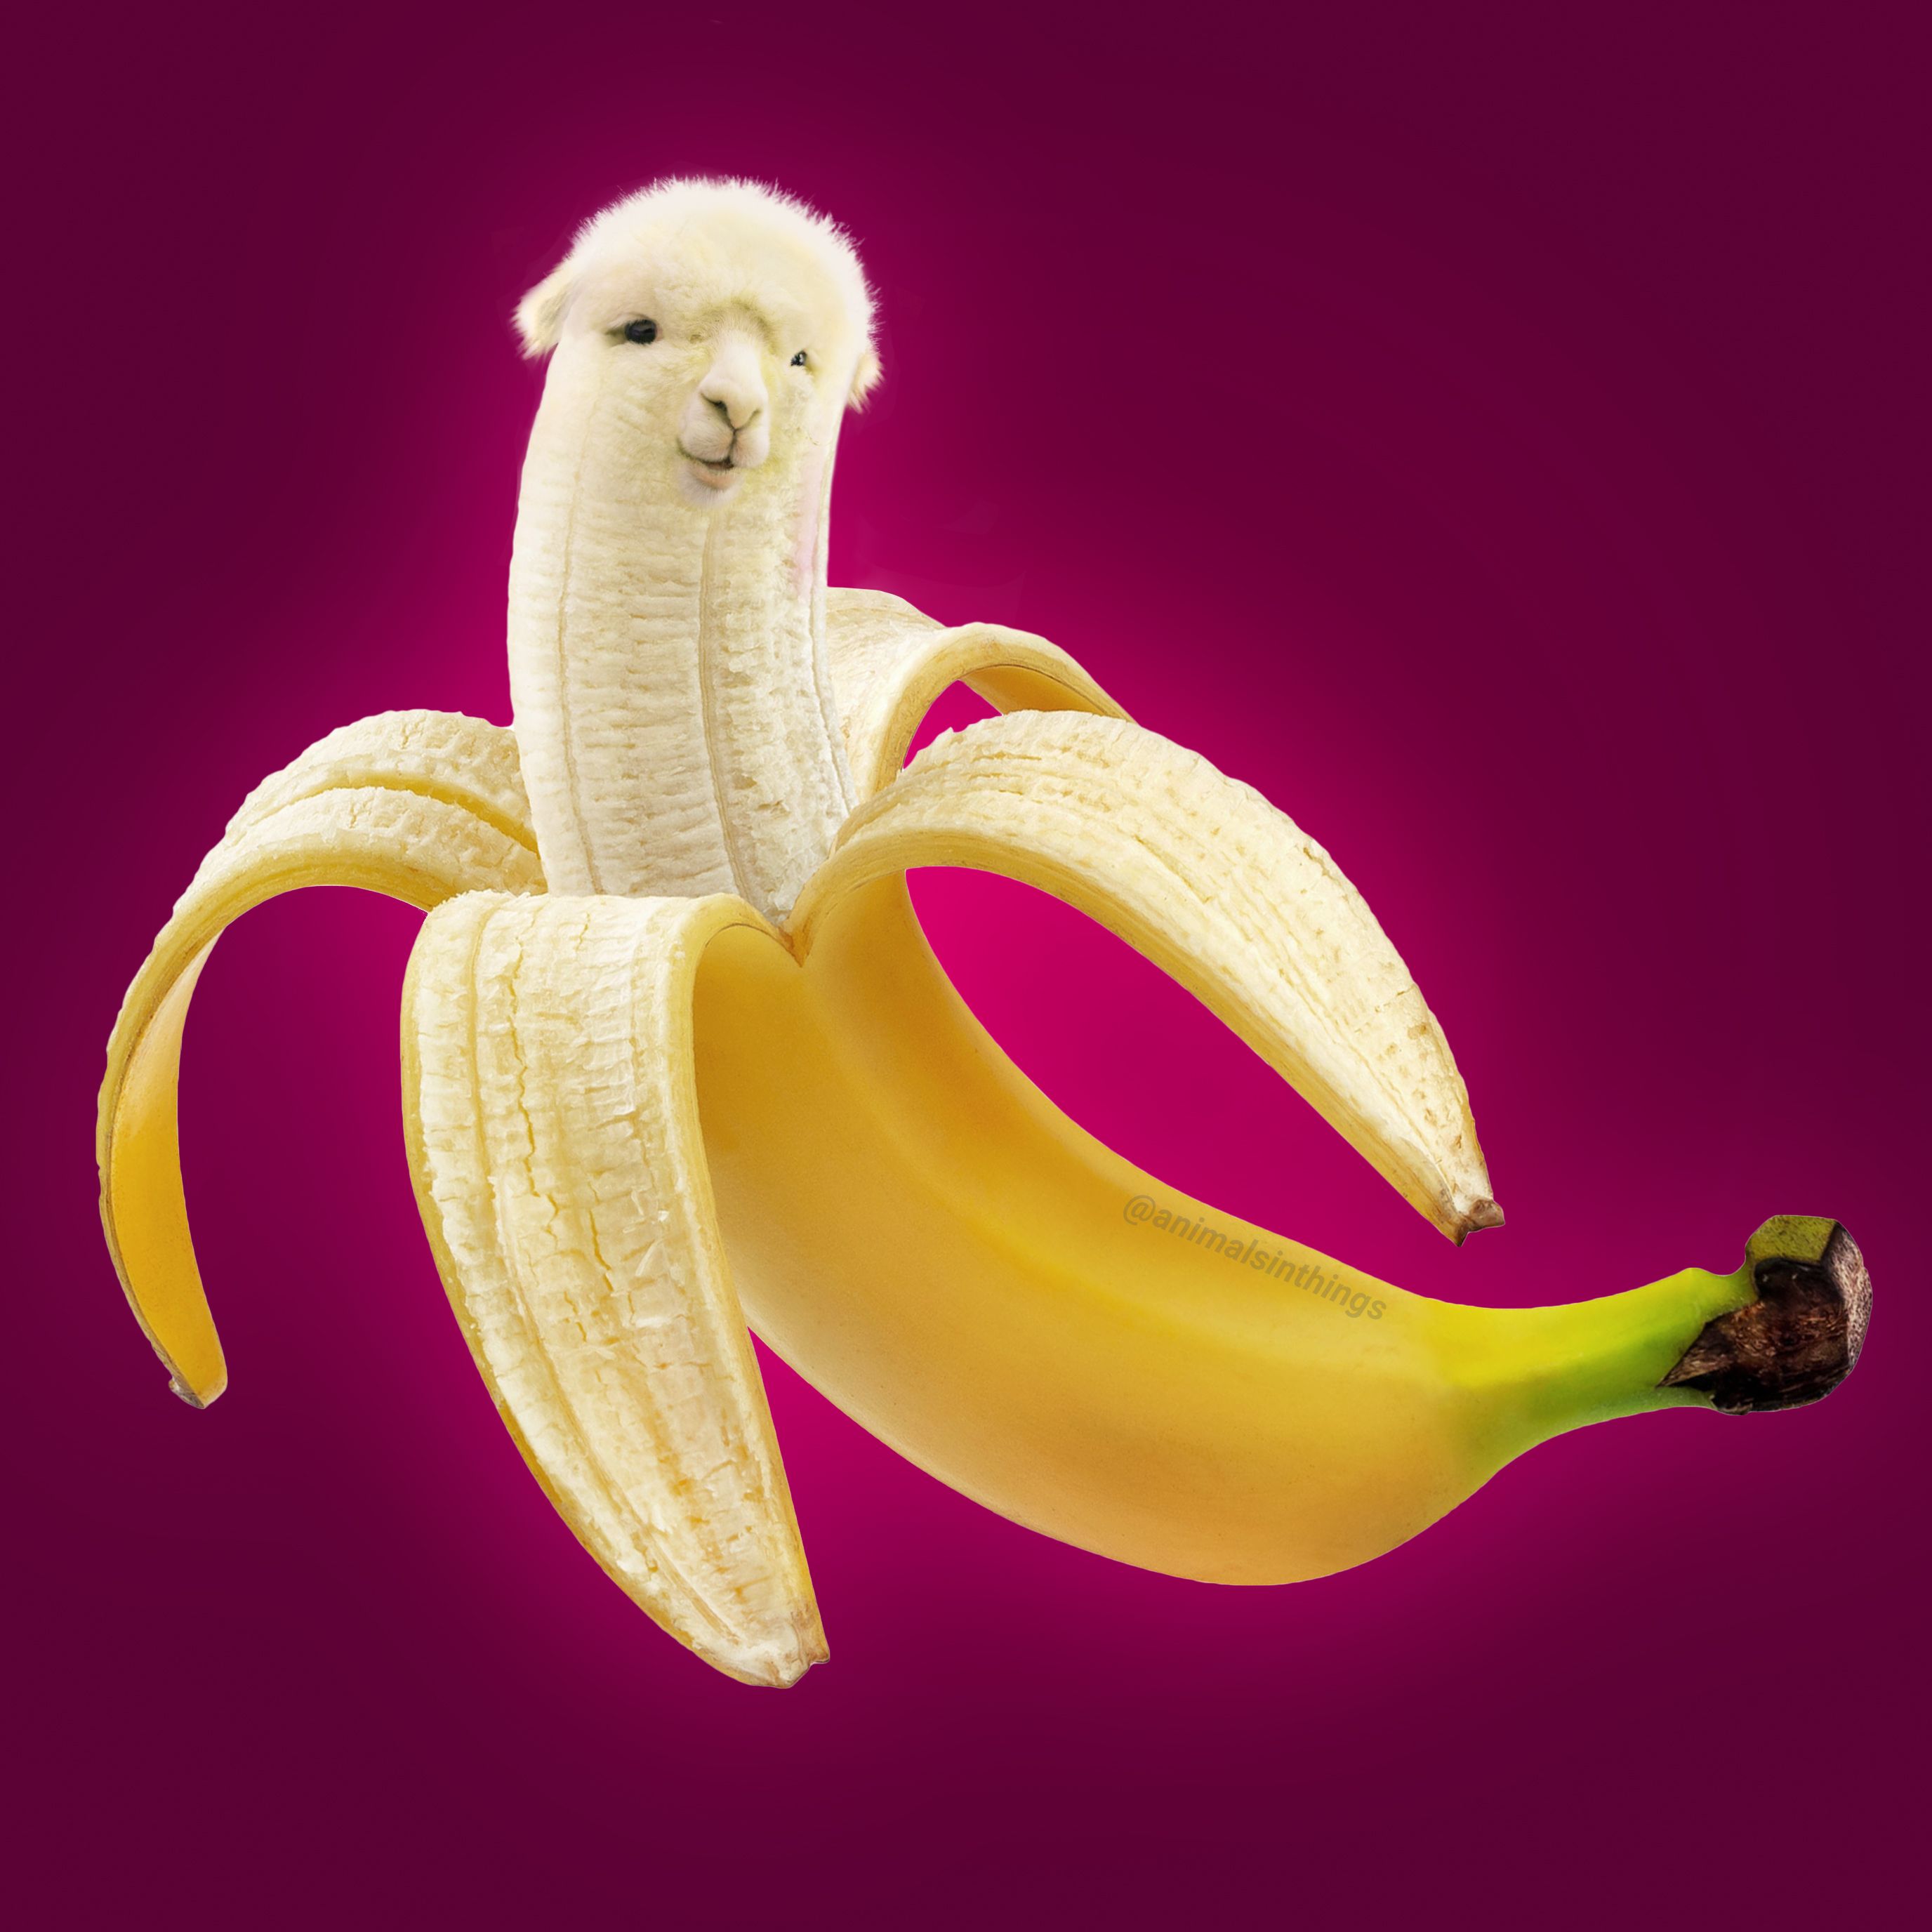 I photoshop animals into various things. Here's a llama and a banana.